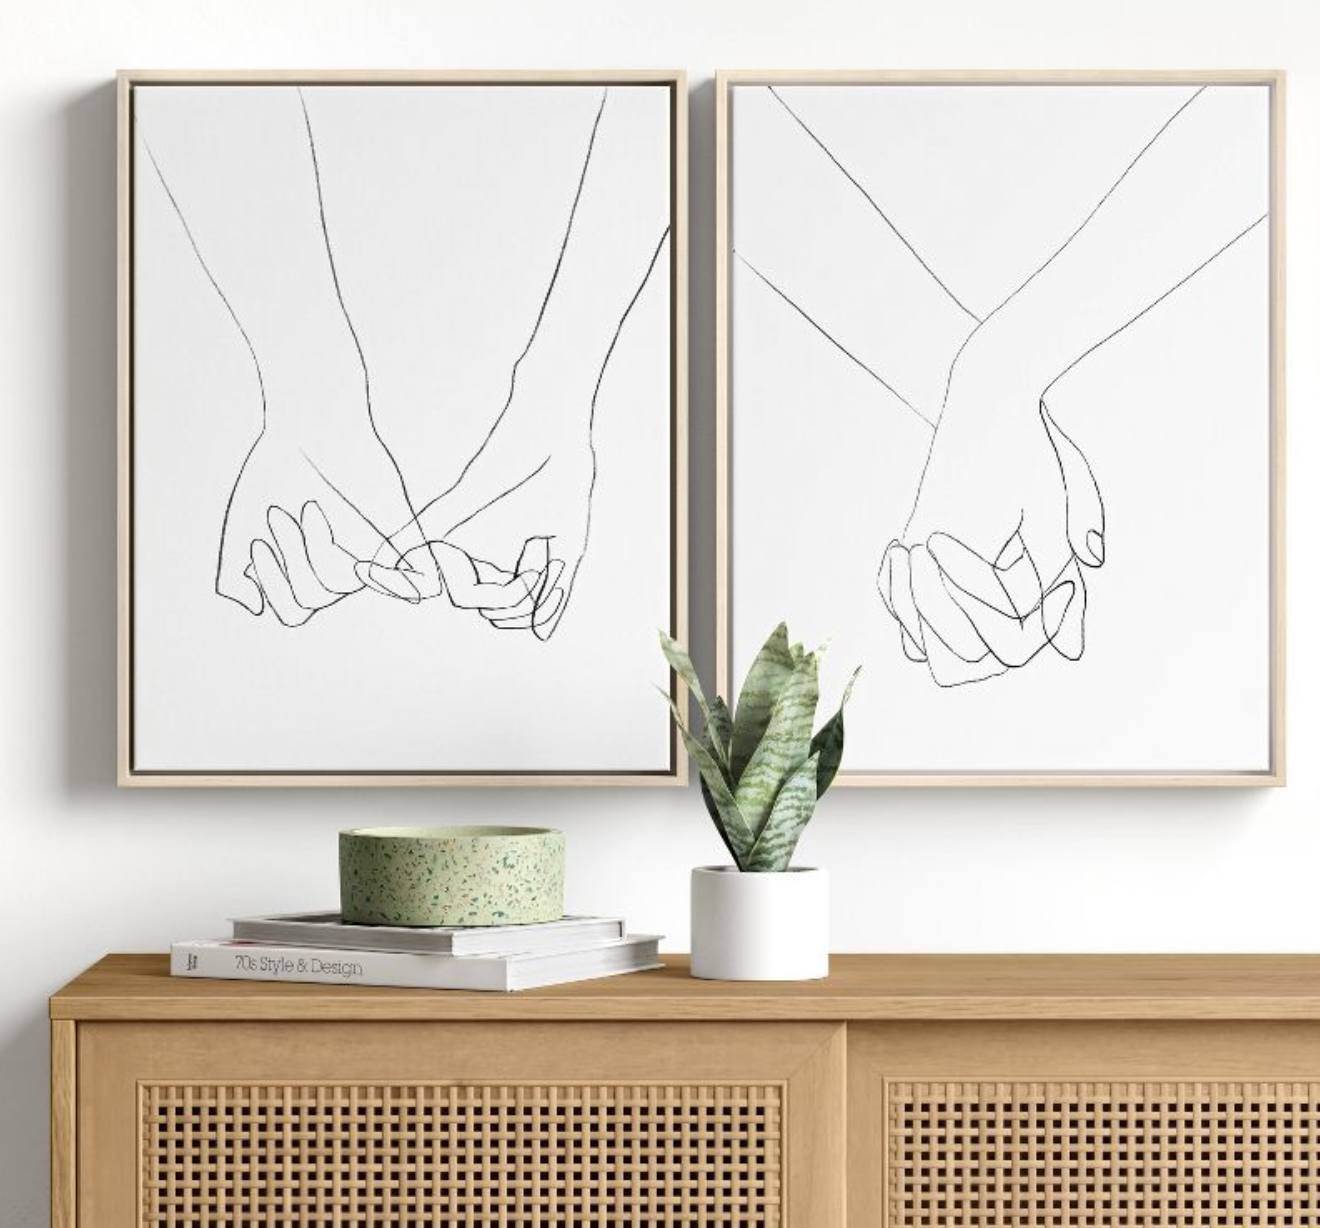 the two canvas prints with drawings of holding hands